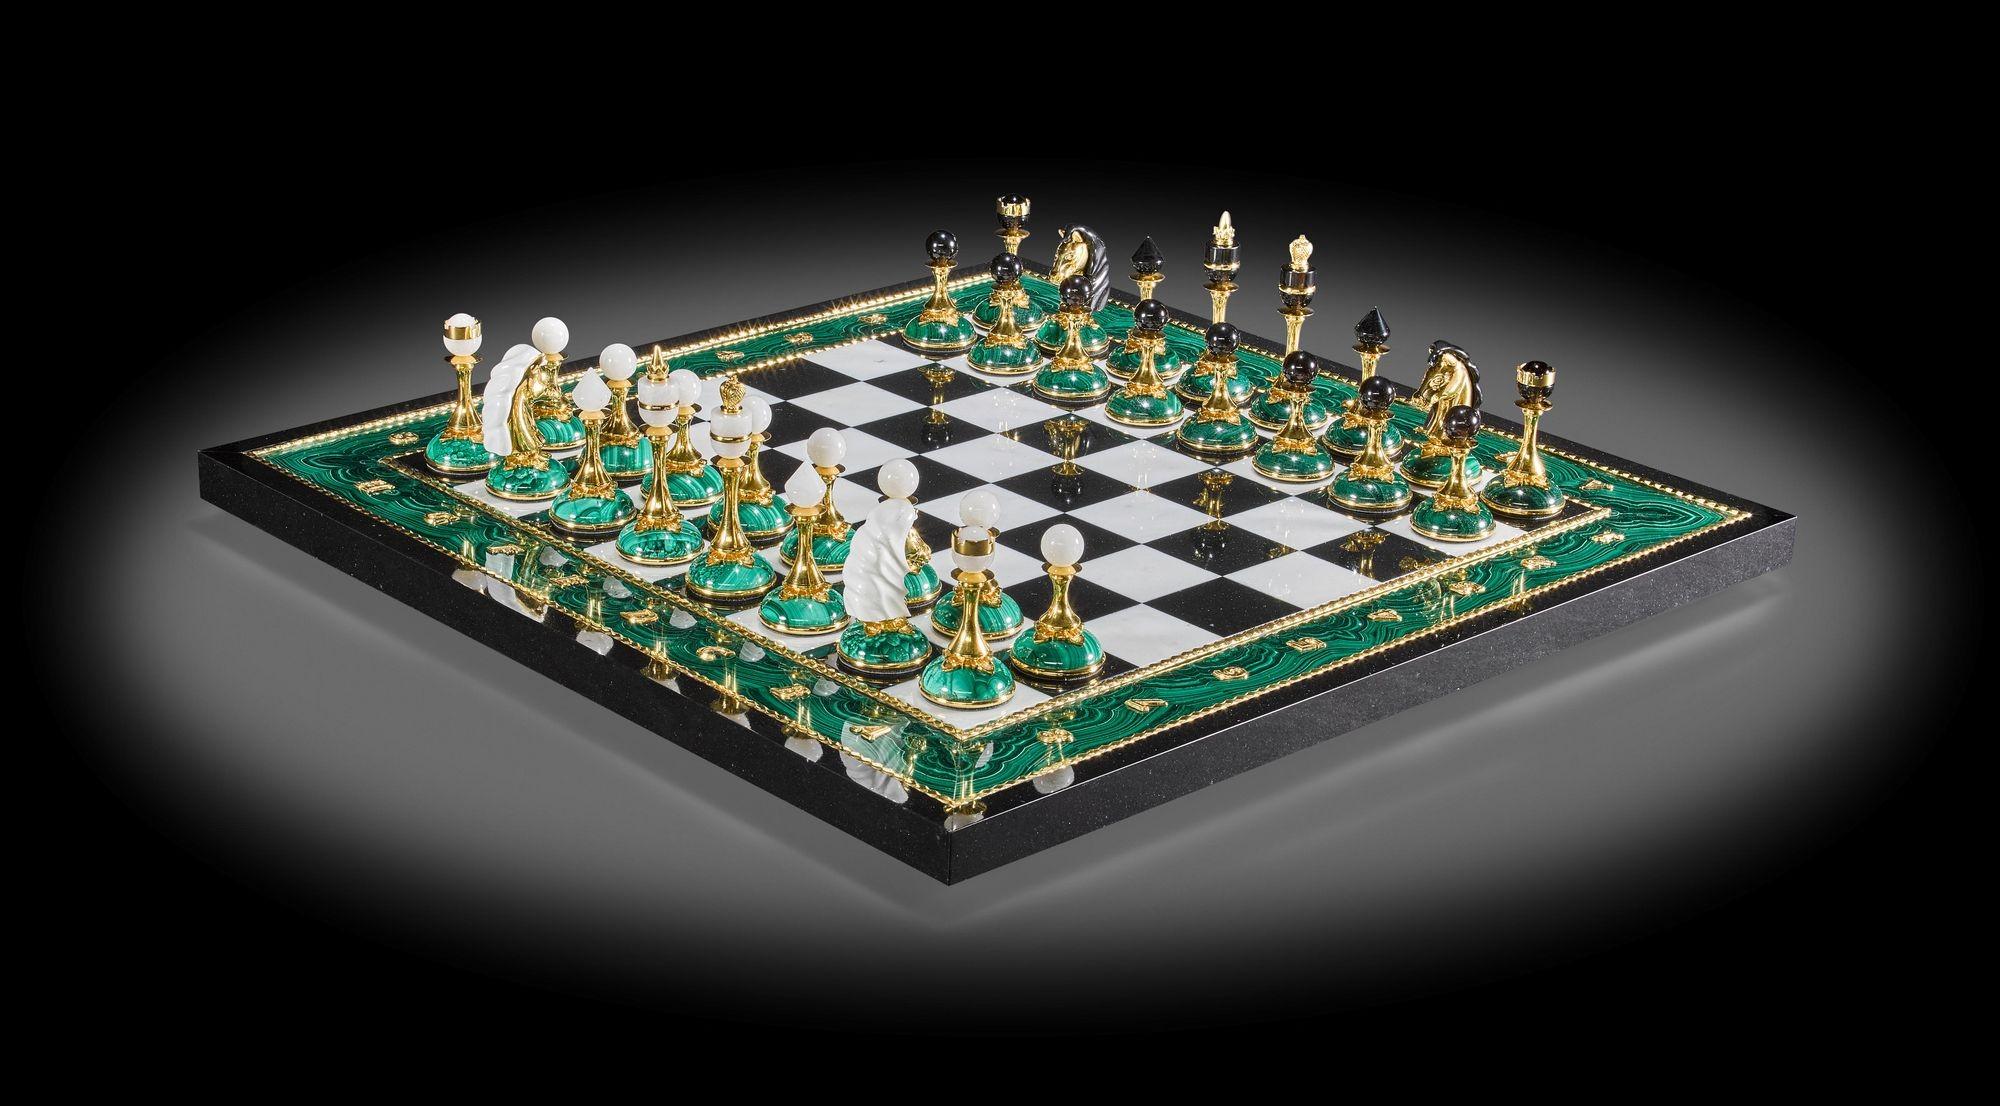 Russian dolerite, malachite and Kascholong opal chess set. Consists of black dolerite squares alternating with white Kascholong opal. The chess pieces are carved with malachite and brass gold-plated fittings.
*Original box included
Dimensions: